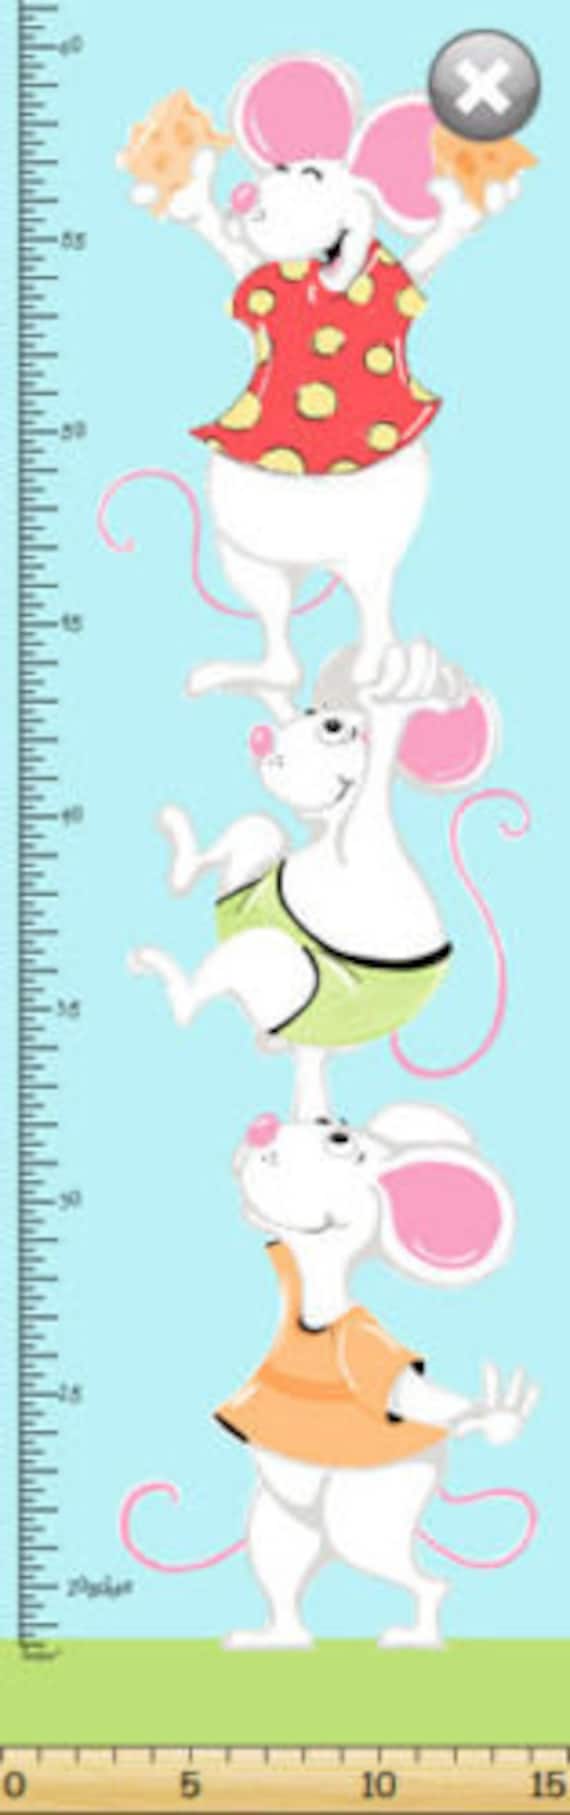 Susybee Nursery Fabric Panel : Norton the mouse and friends getting cheese Growth Chart Panel 100% cotton fabric by the Panel 15"x43" (SB61)